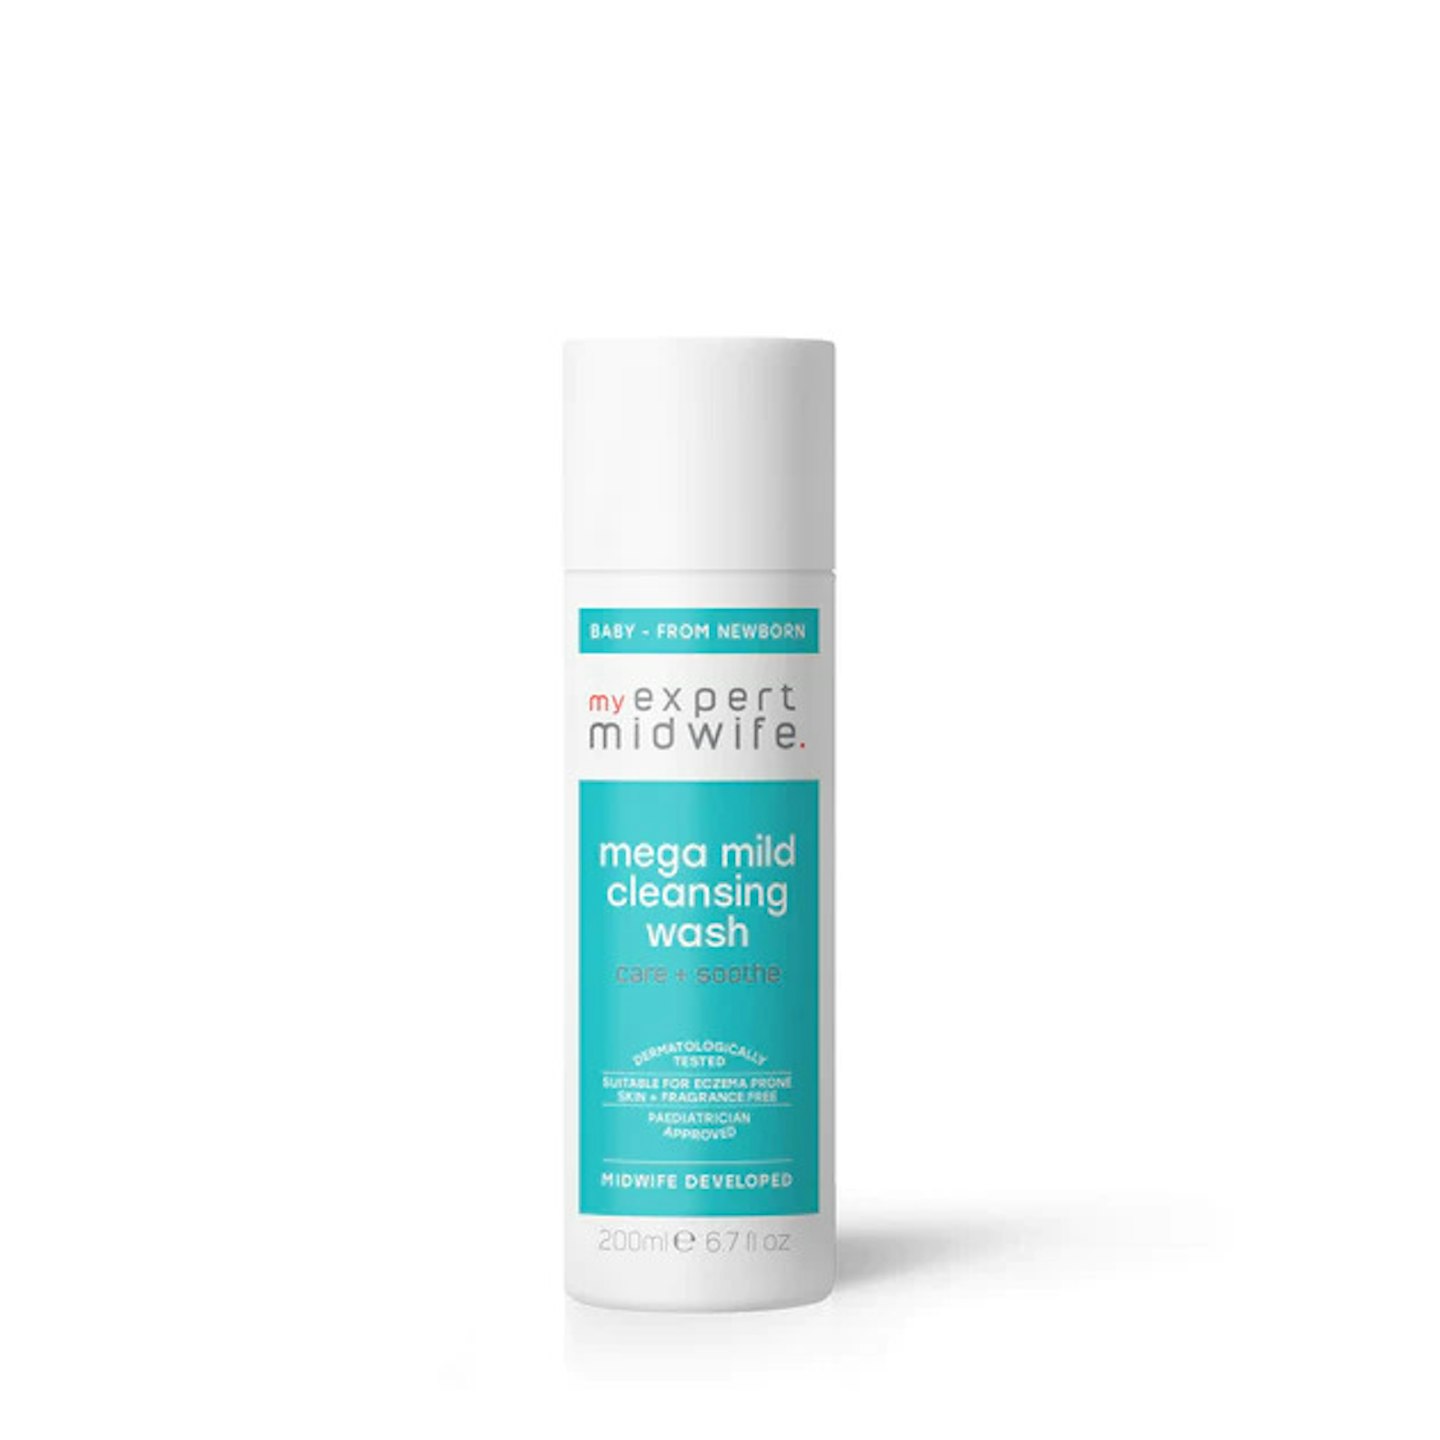 My Expert Midwife Mega Mild Cleansing Wash